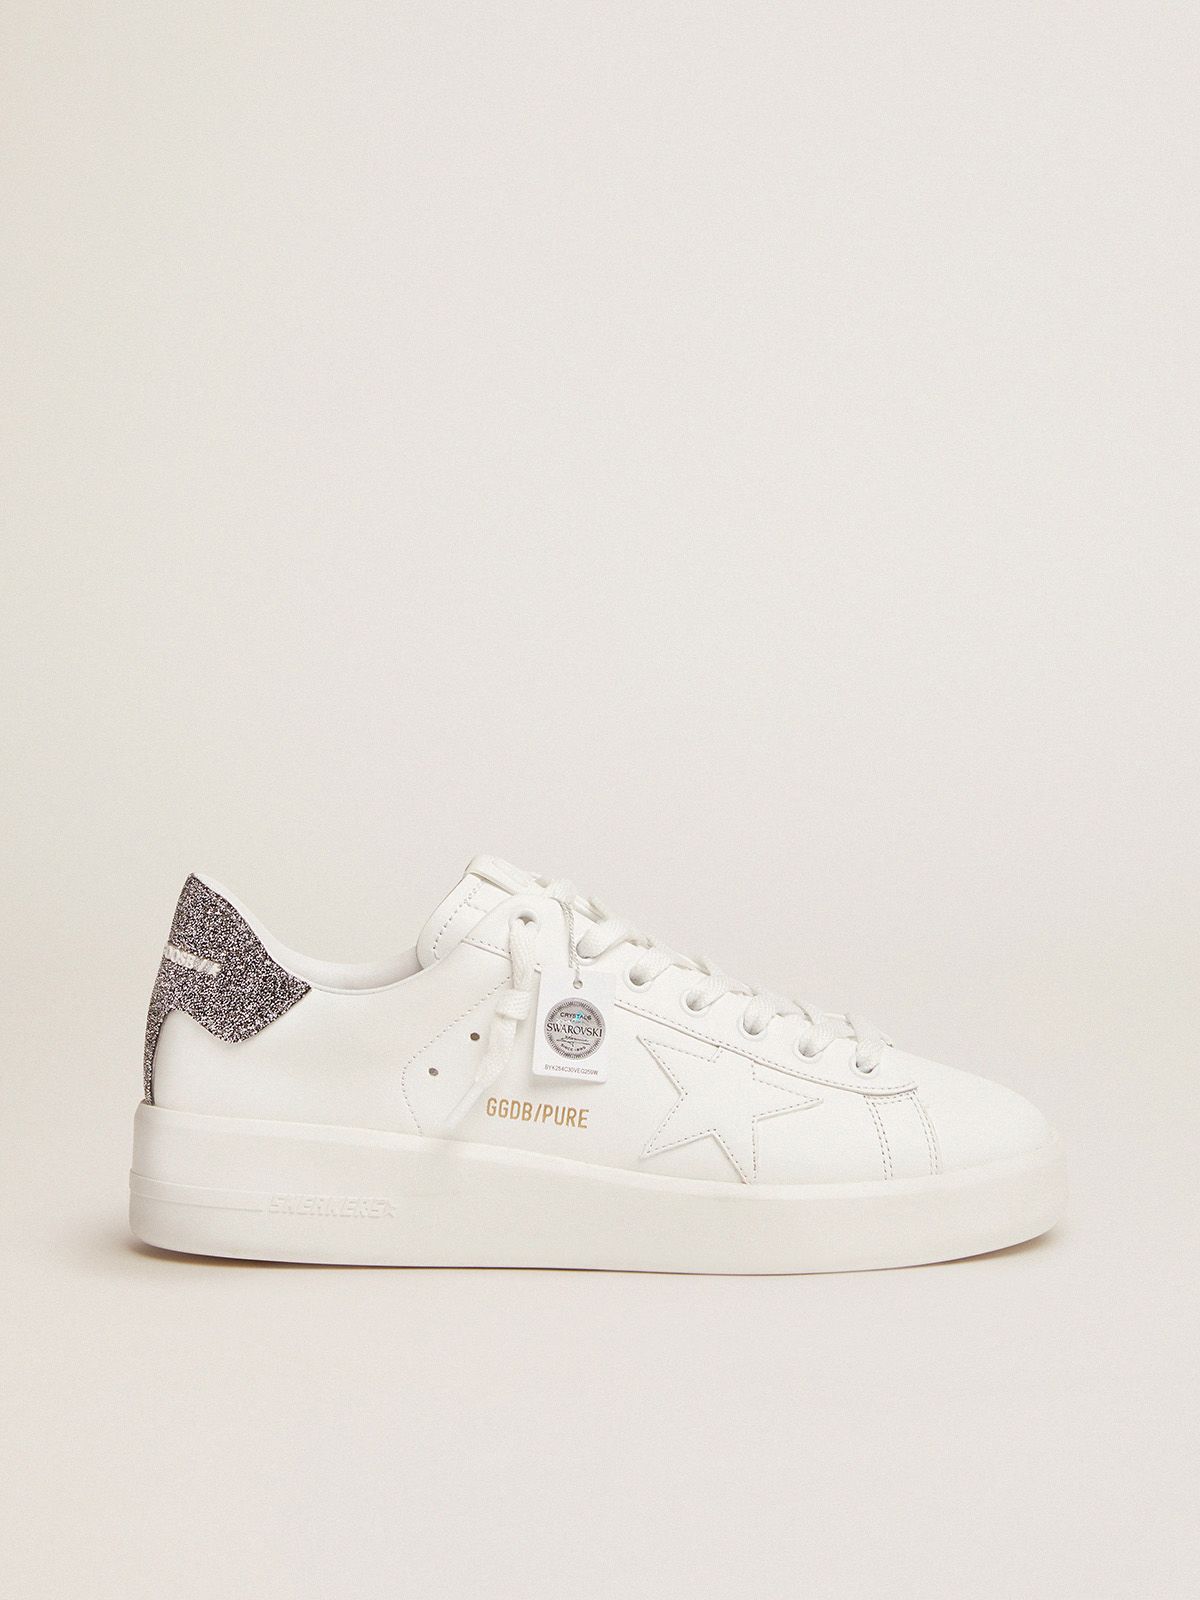 Purestar sneakers in white leather with silver crystal heel tab